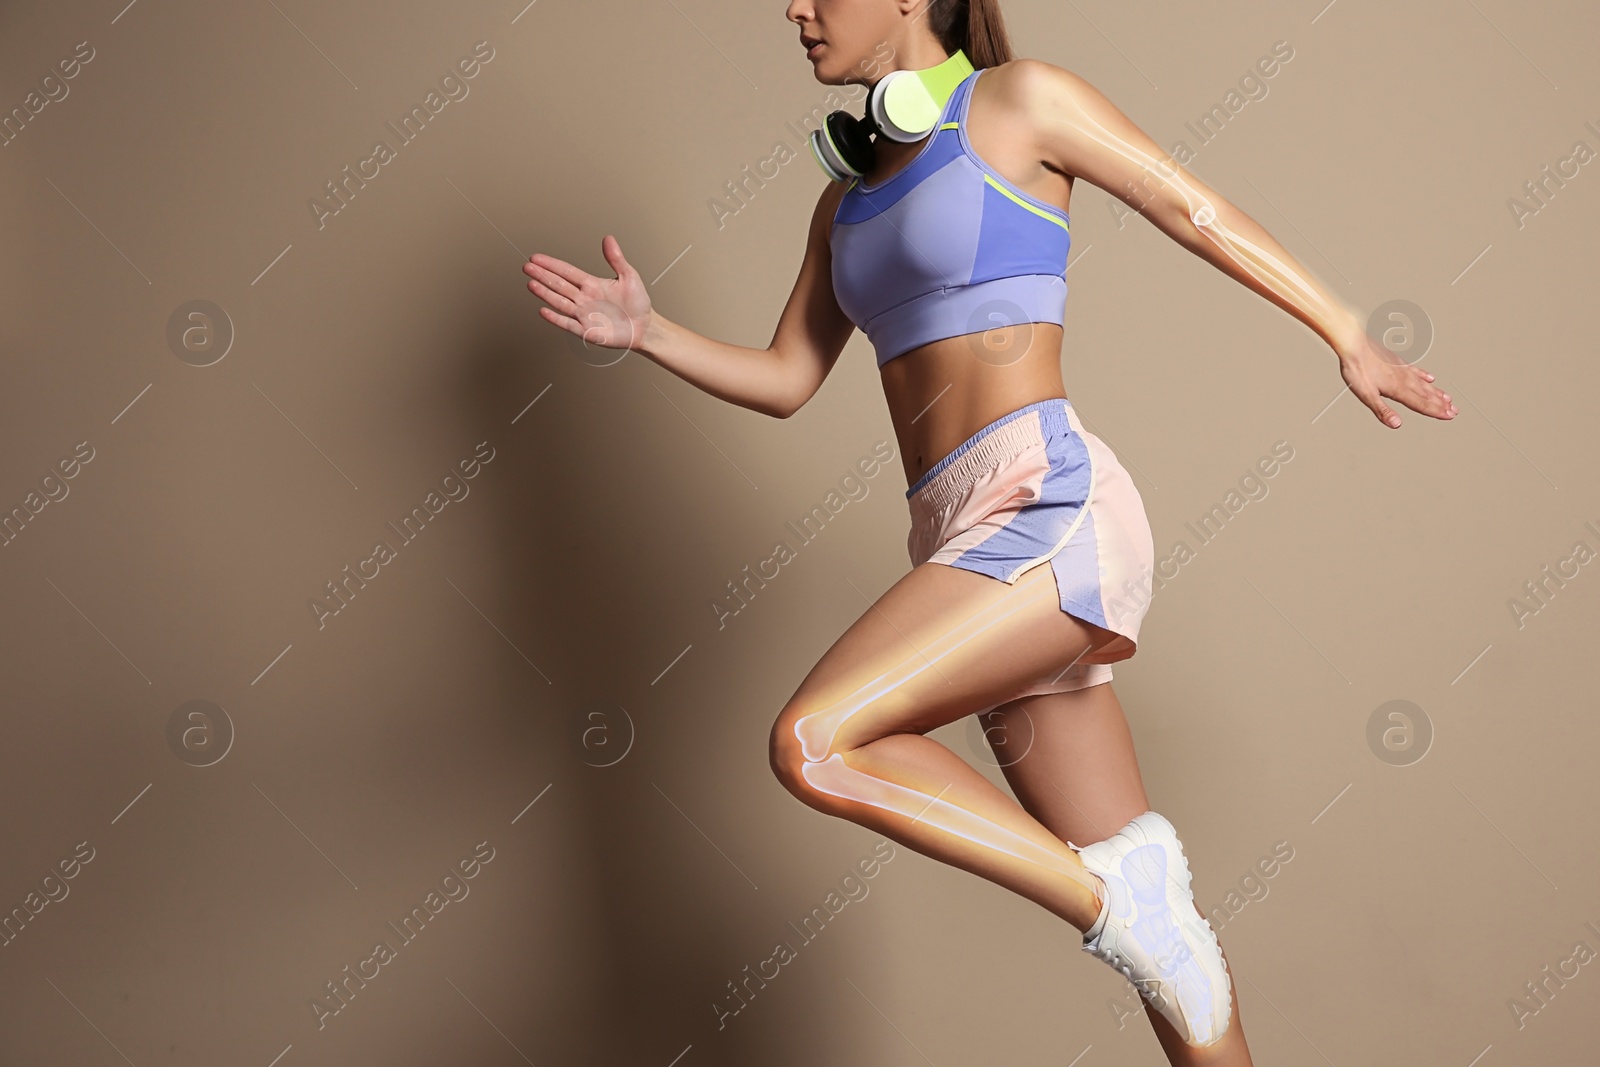 Image of Digital compositehighlighted bones and woman in sportswear with headphones running on beige background